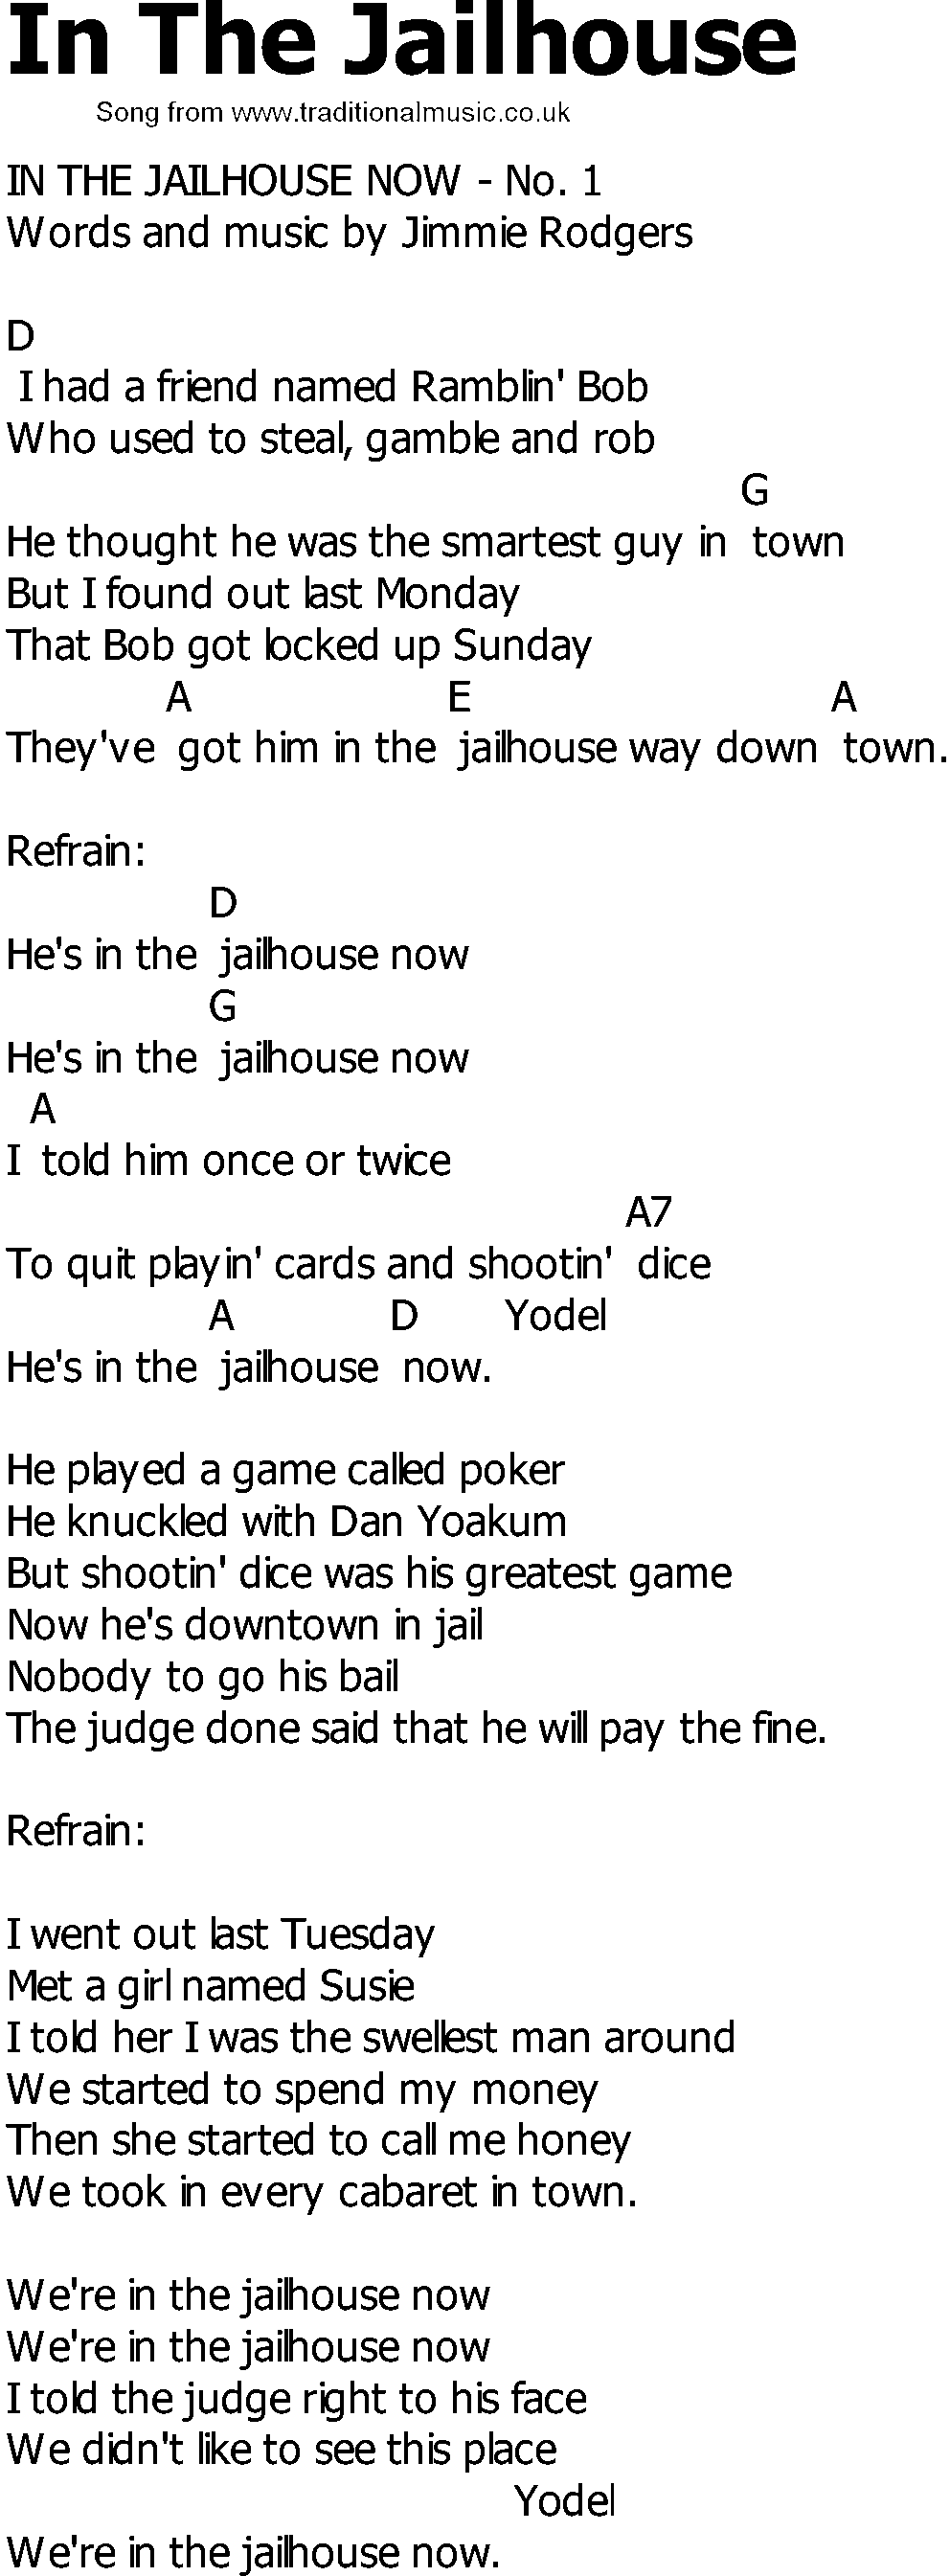 Old Country song lyrics with chords - In The Jailhouse